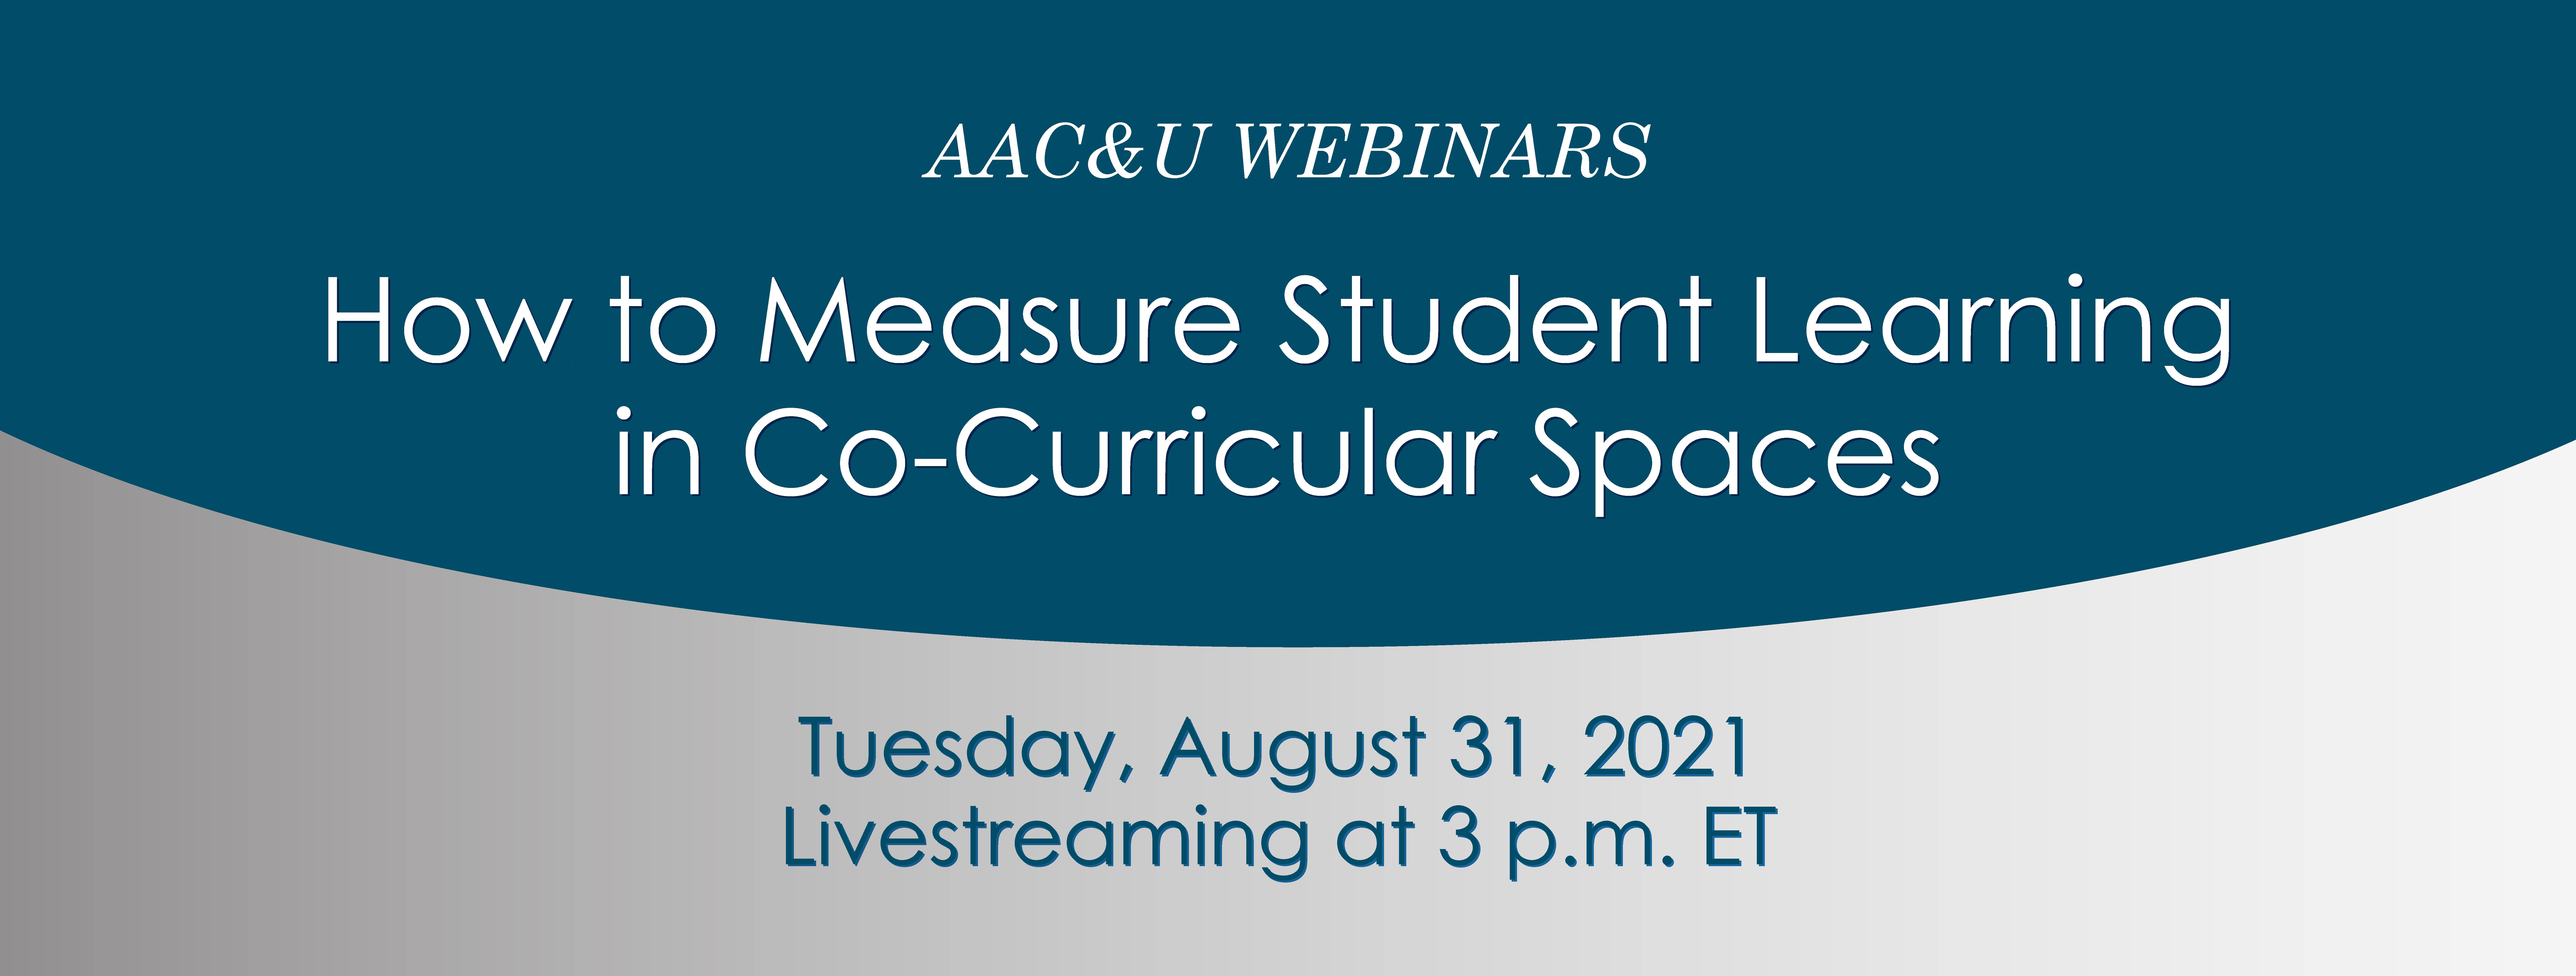 2021 Webinar: How to Measure Student Learning